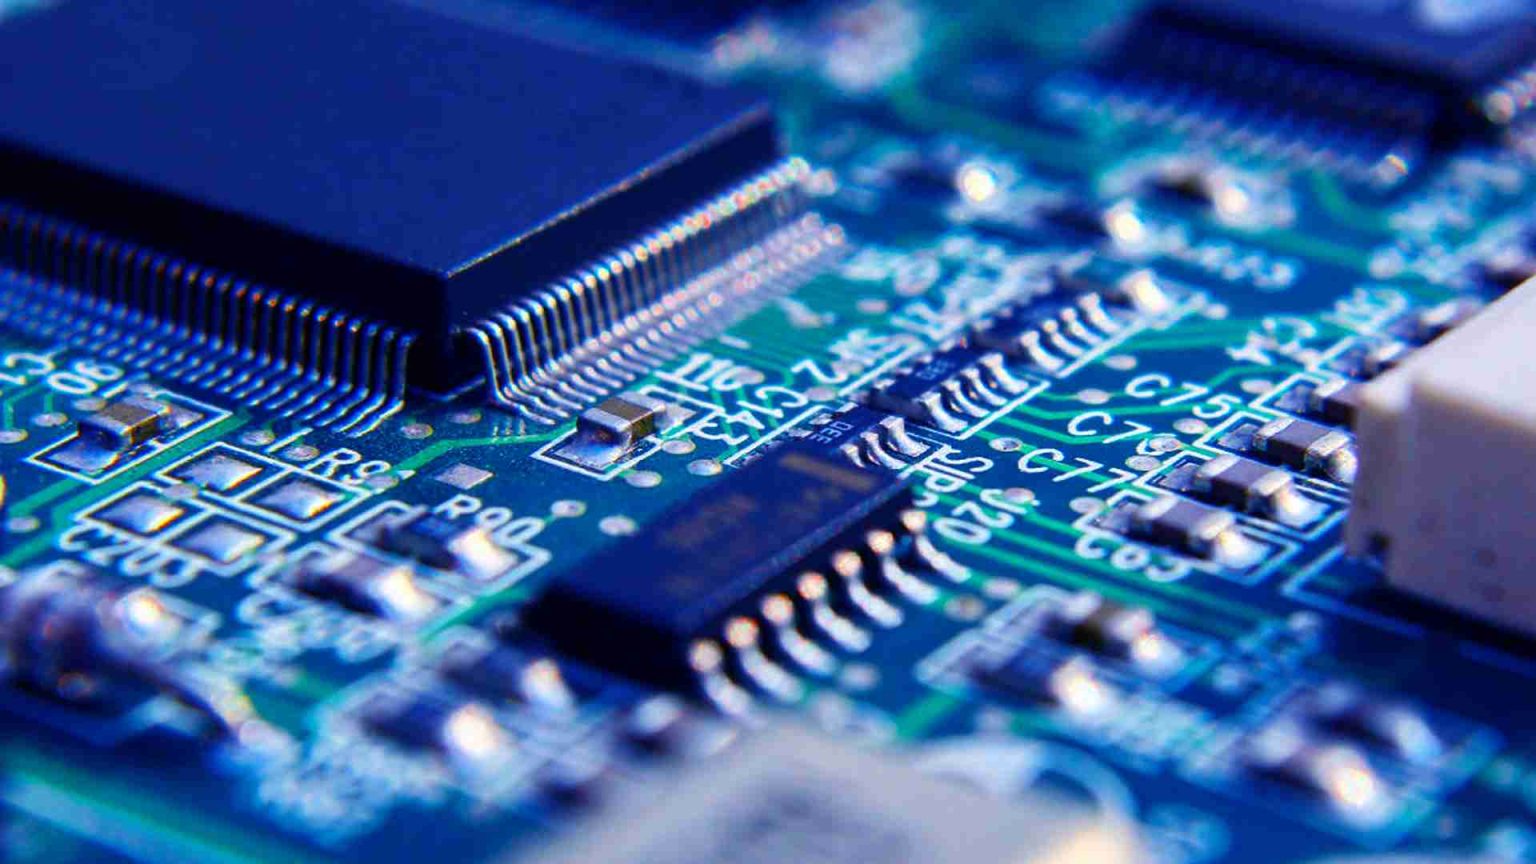 India's quest to the global semiconductor hub